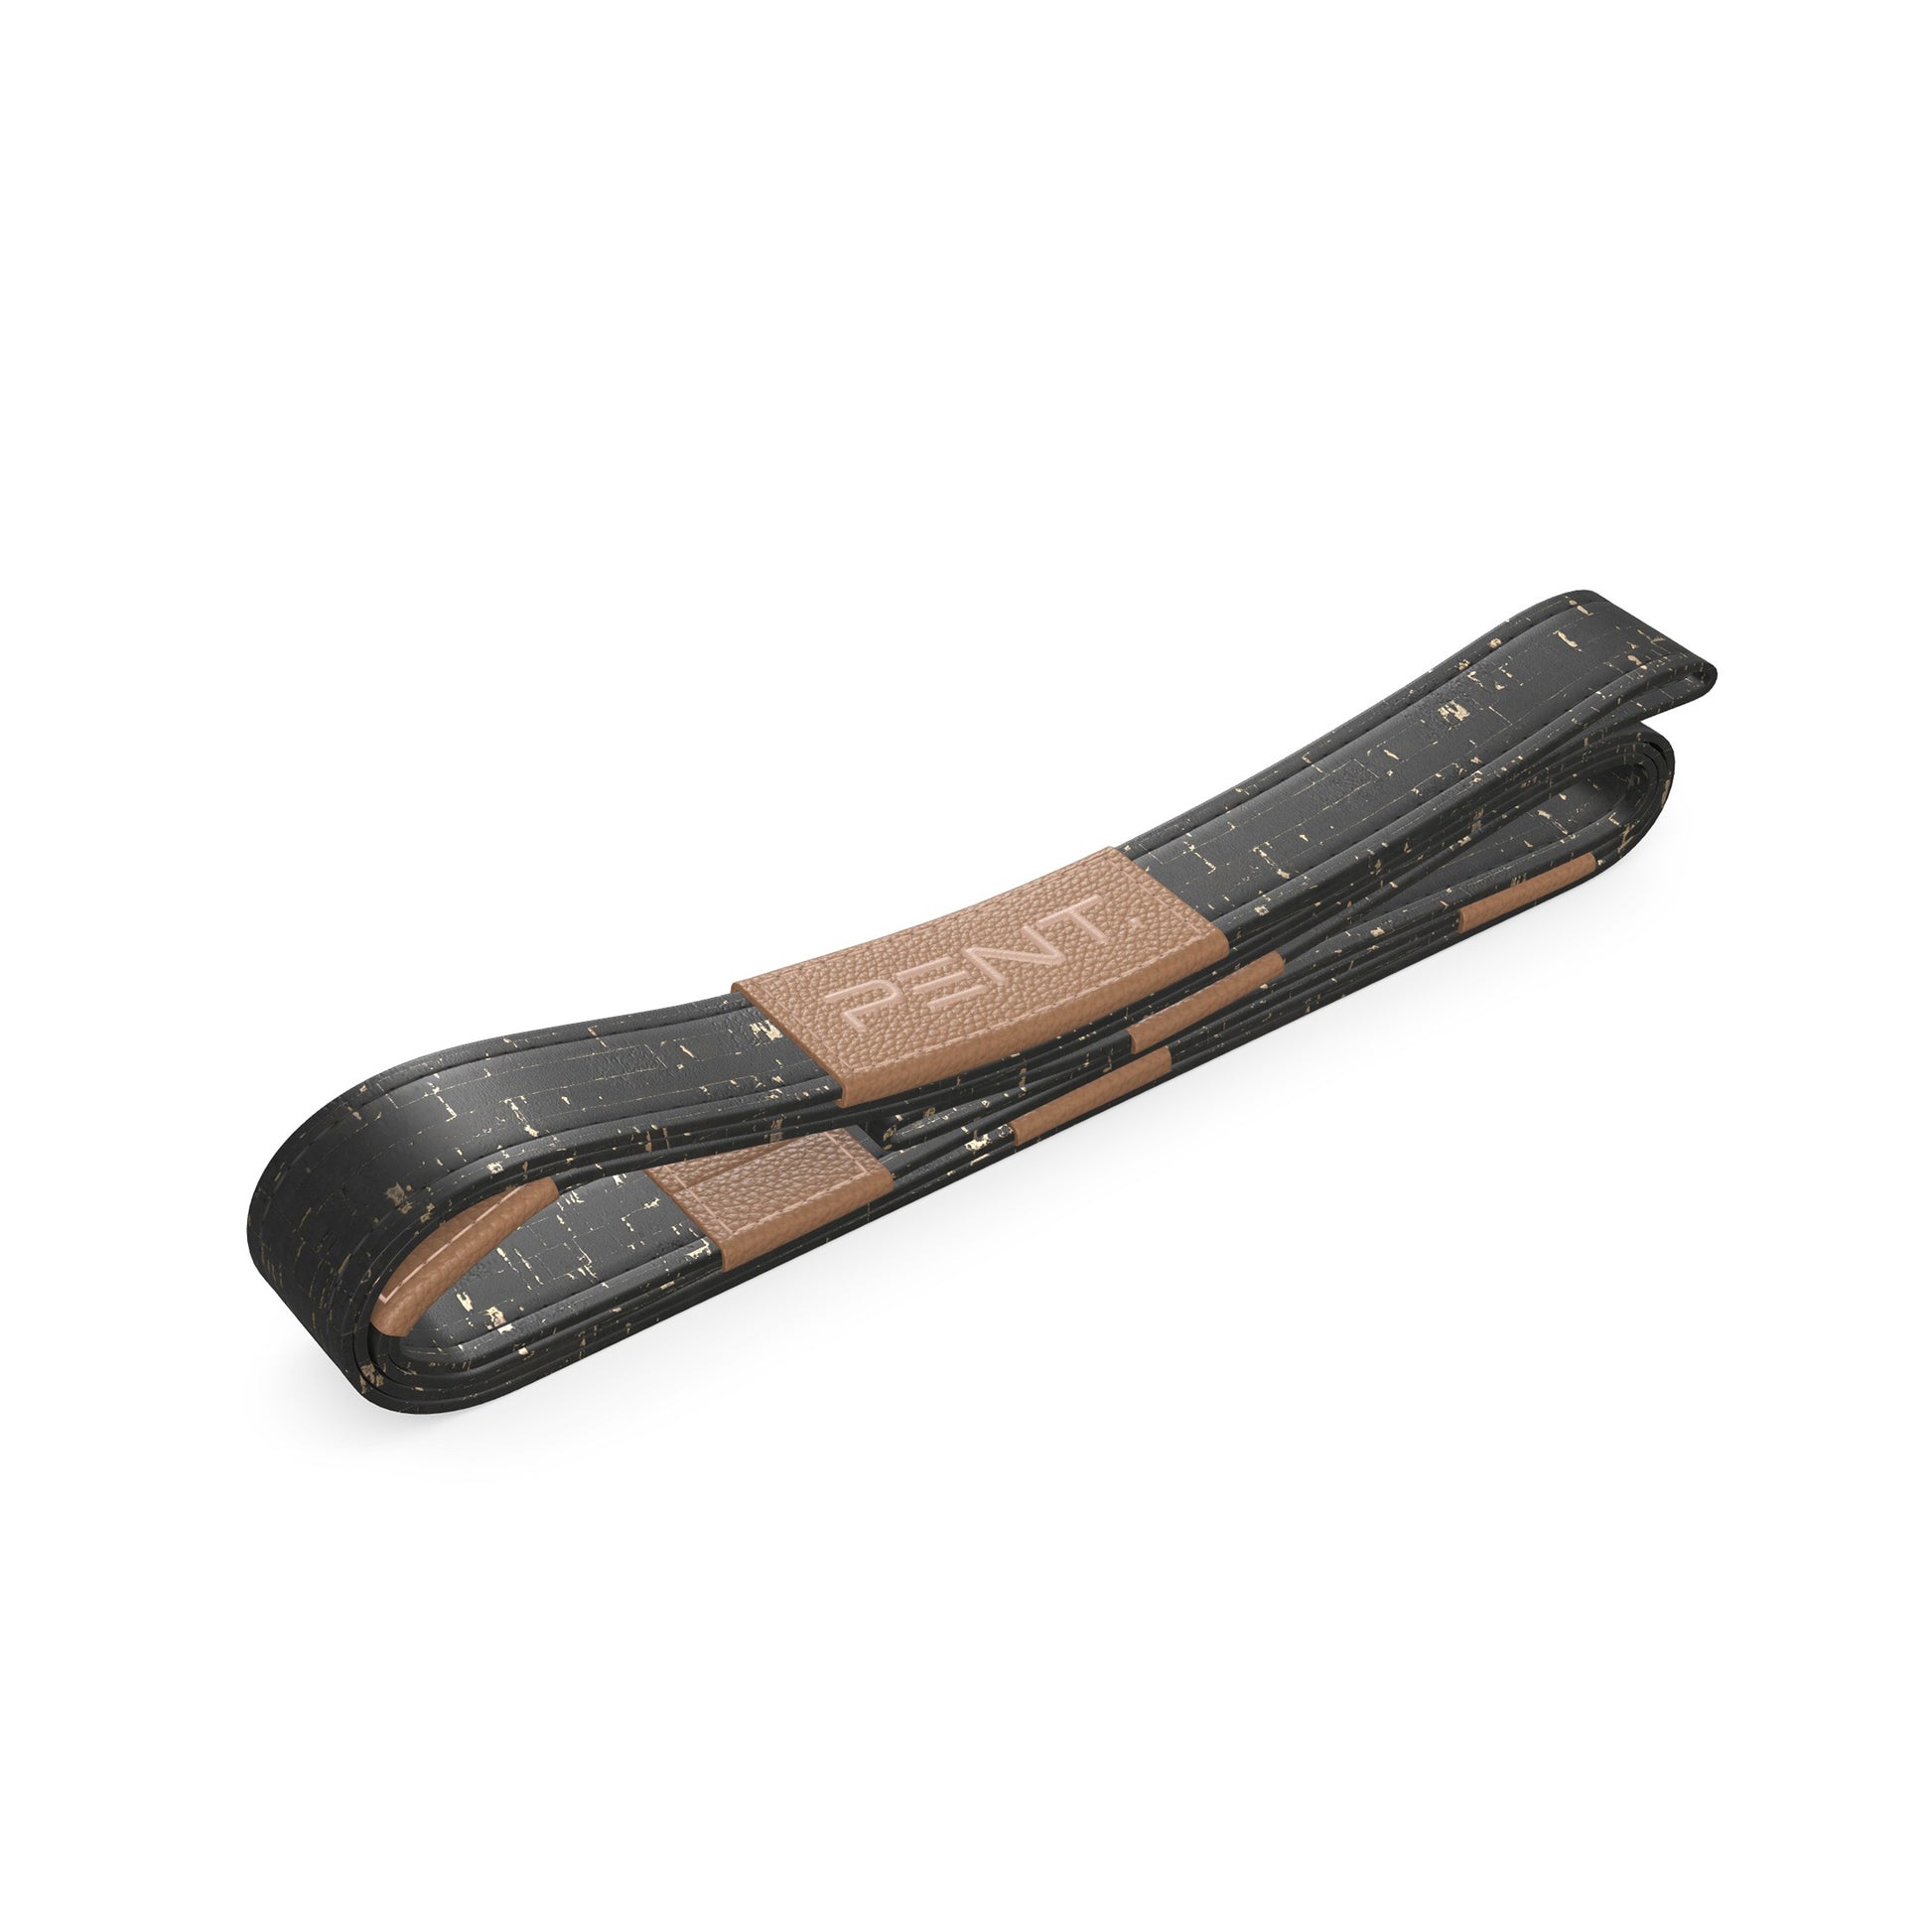 PENT PASA Luxury Leather and Cork Yoga Strap. Cycling Bears. Bespoke Fitness Equipment. Luxury Yoga Accessories.